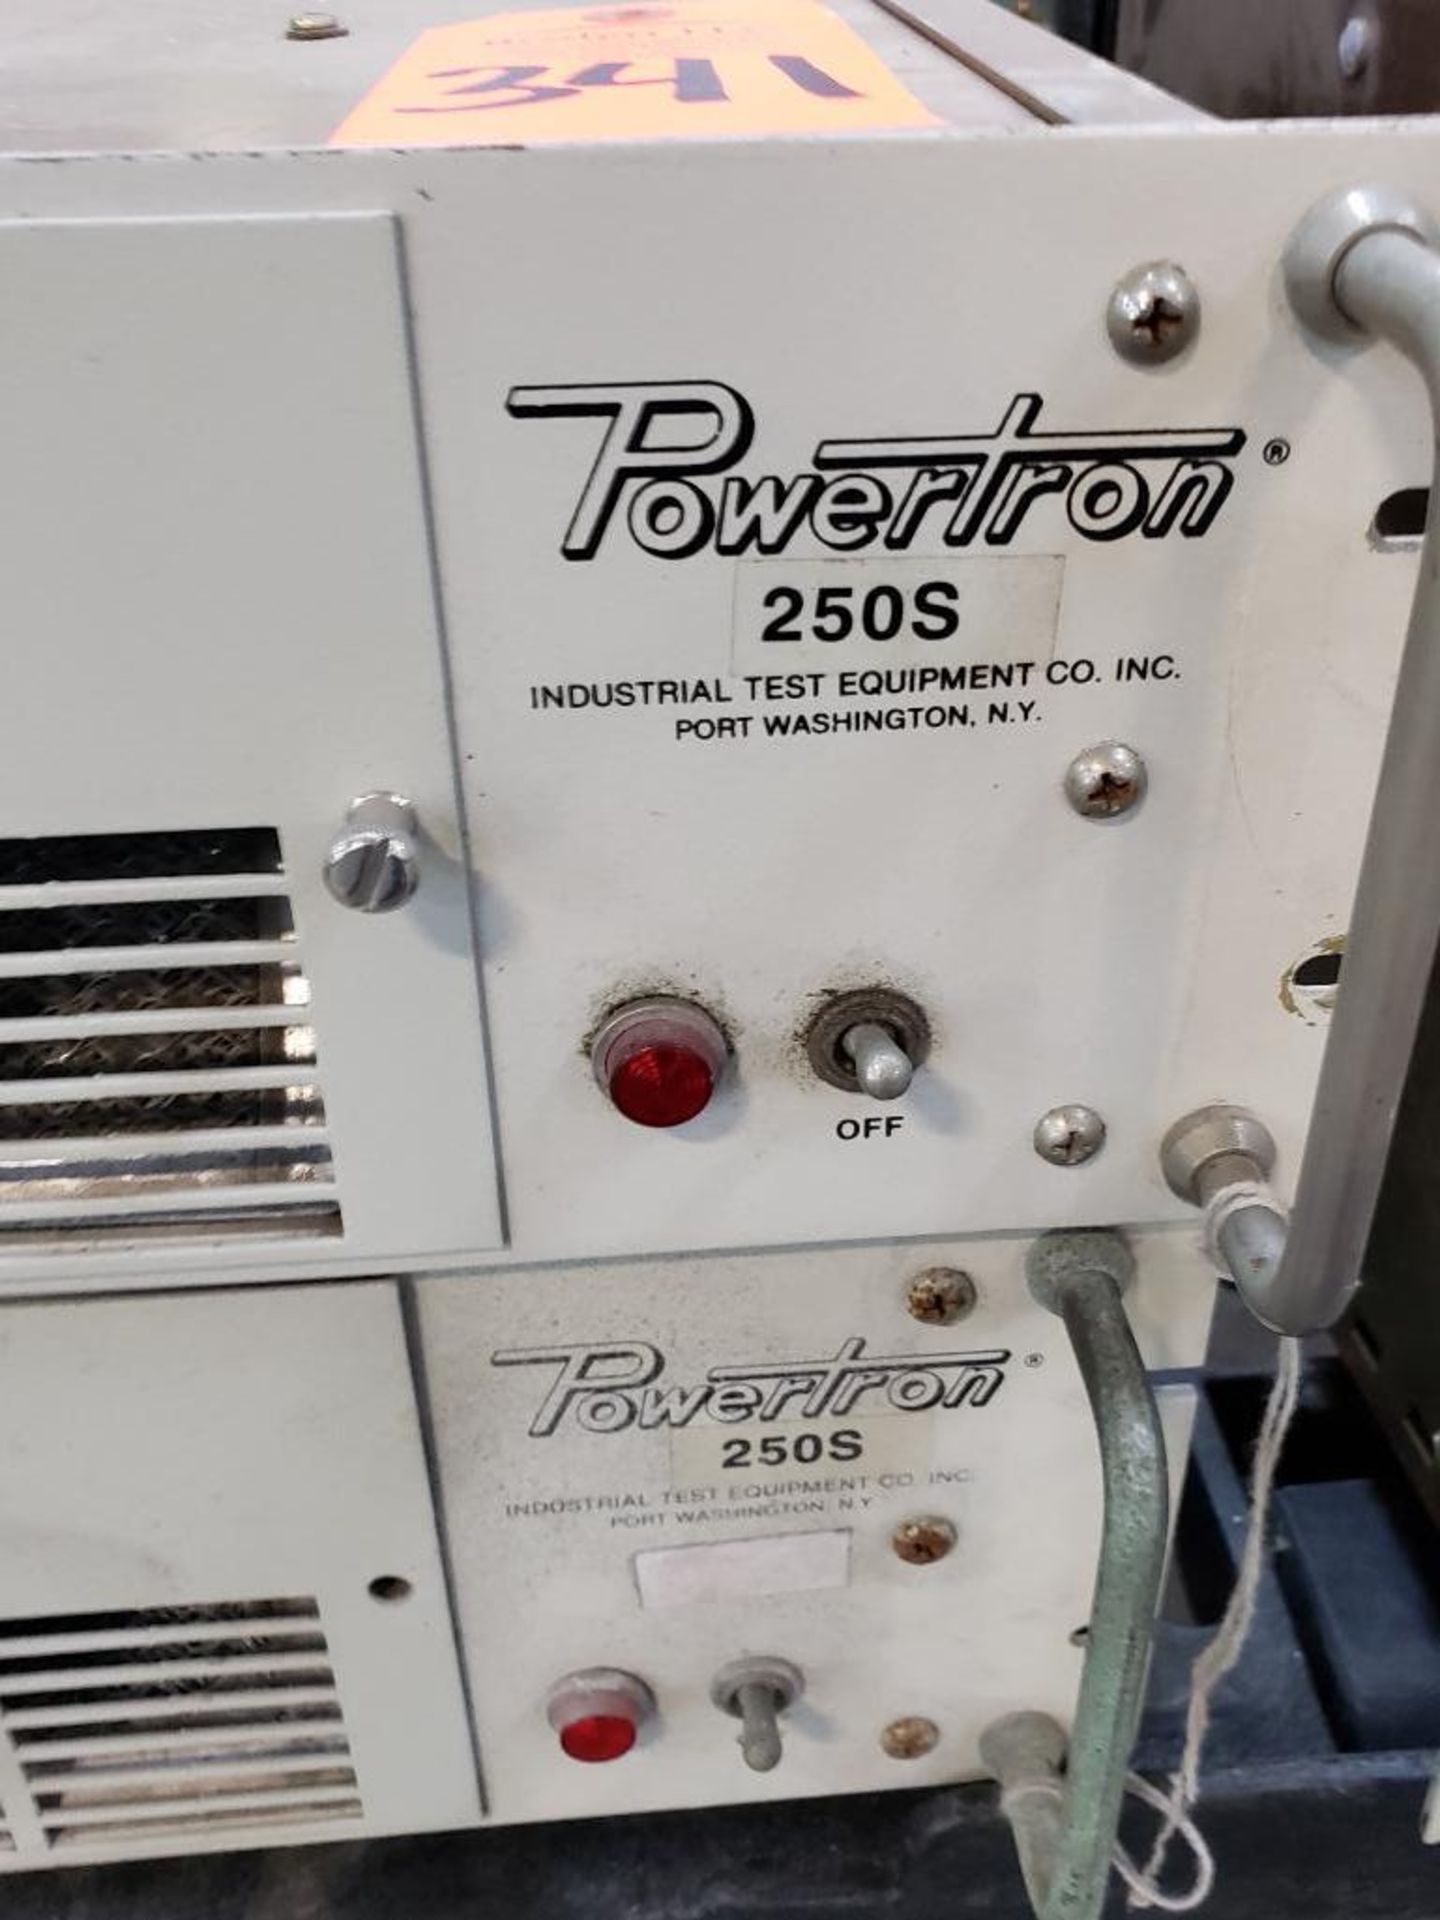 Qty 2 - Powertron Model 250S power supplies. - Image 2 of 3